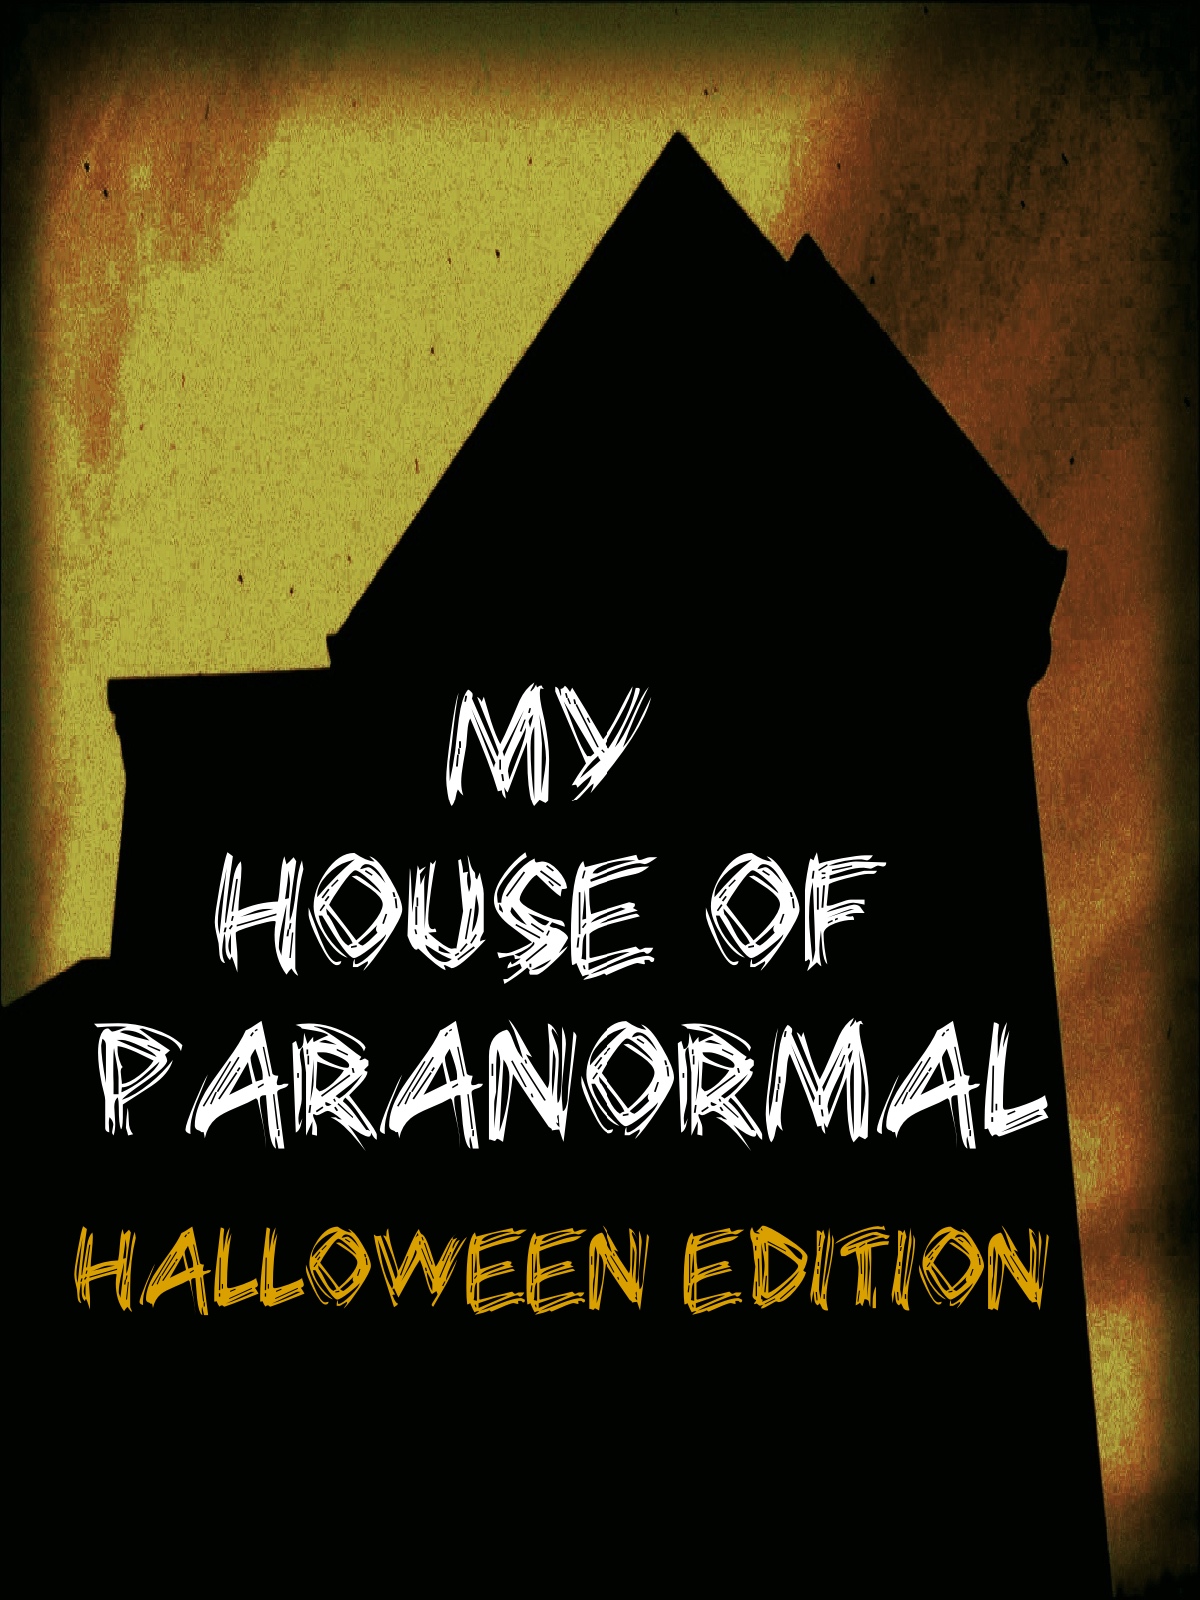 My House of Paranormal: Halloween Edition (2020)